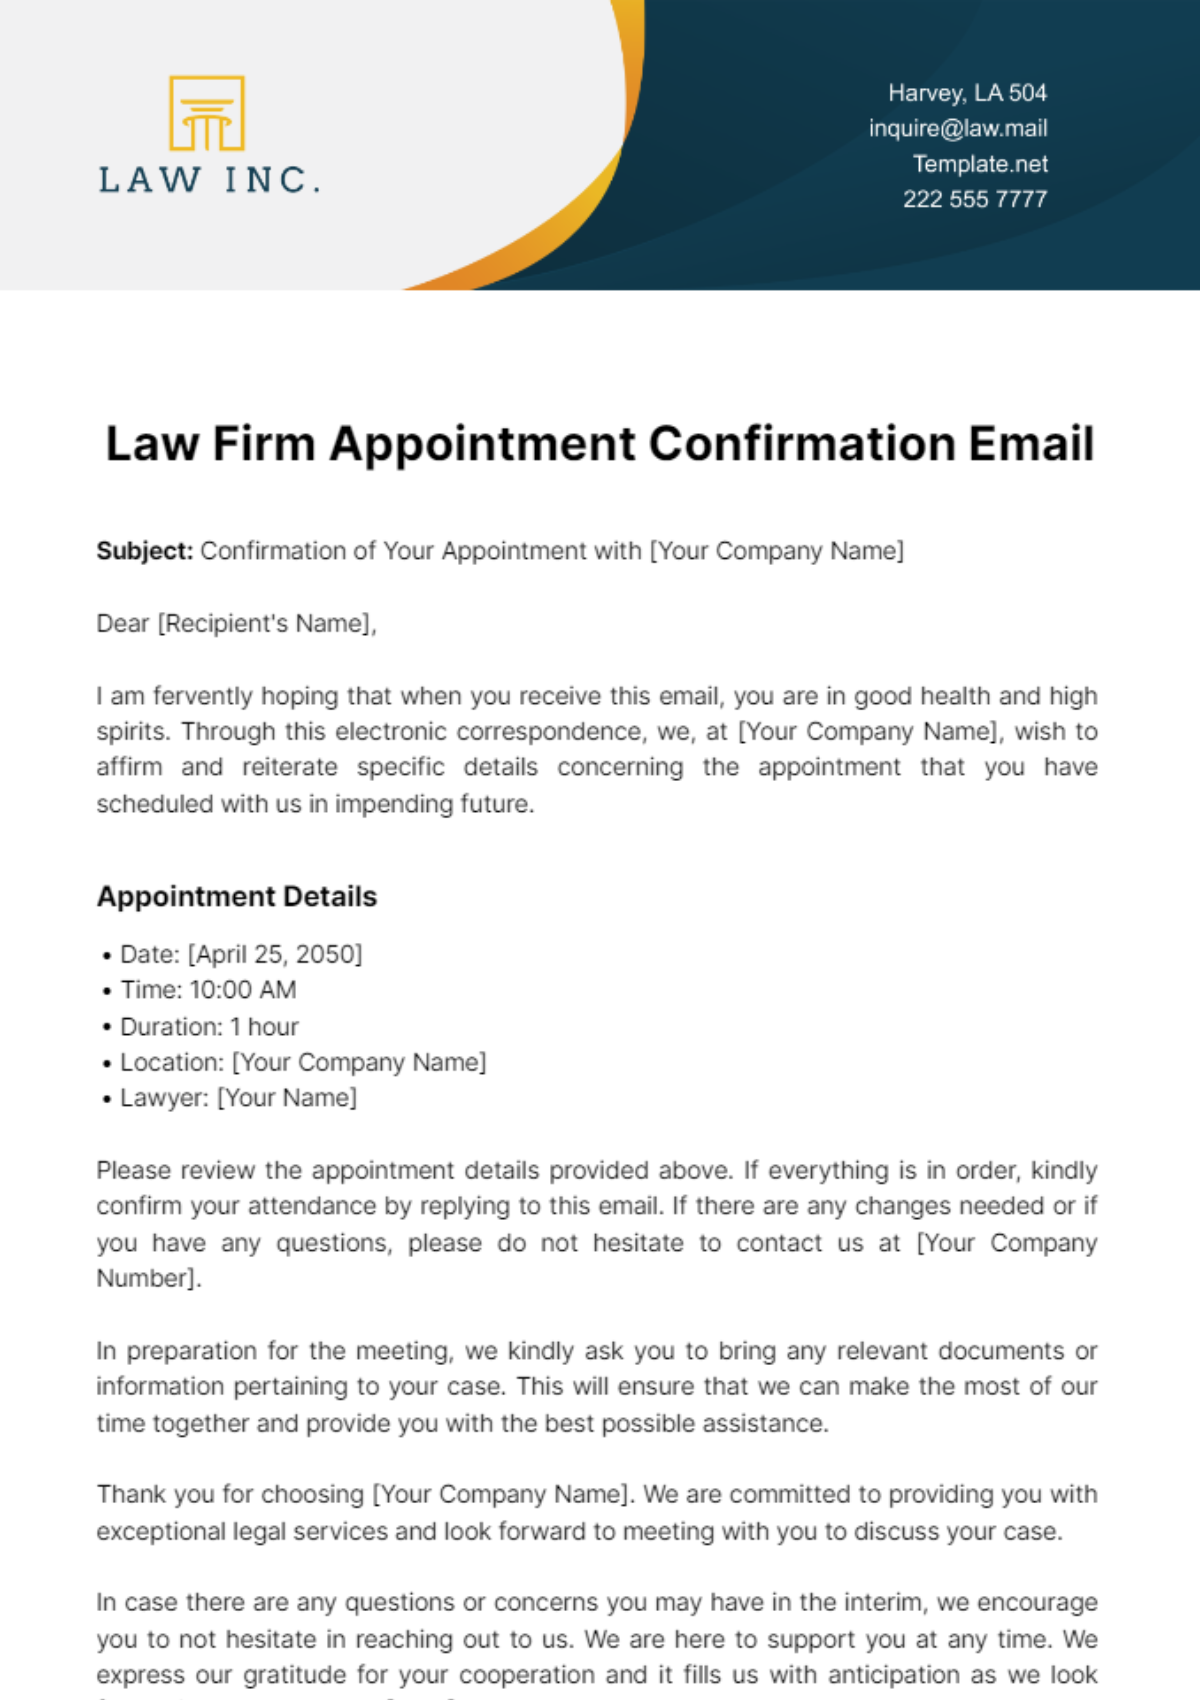 Law Firm Appointment Confirmation Email Template